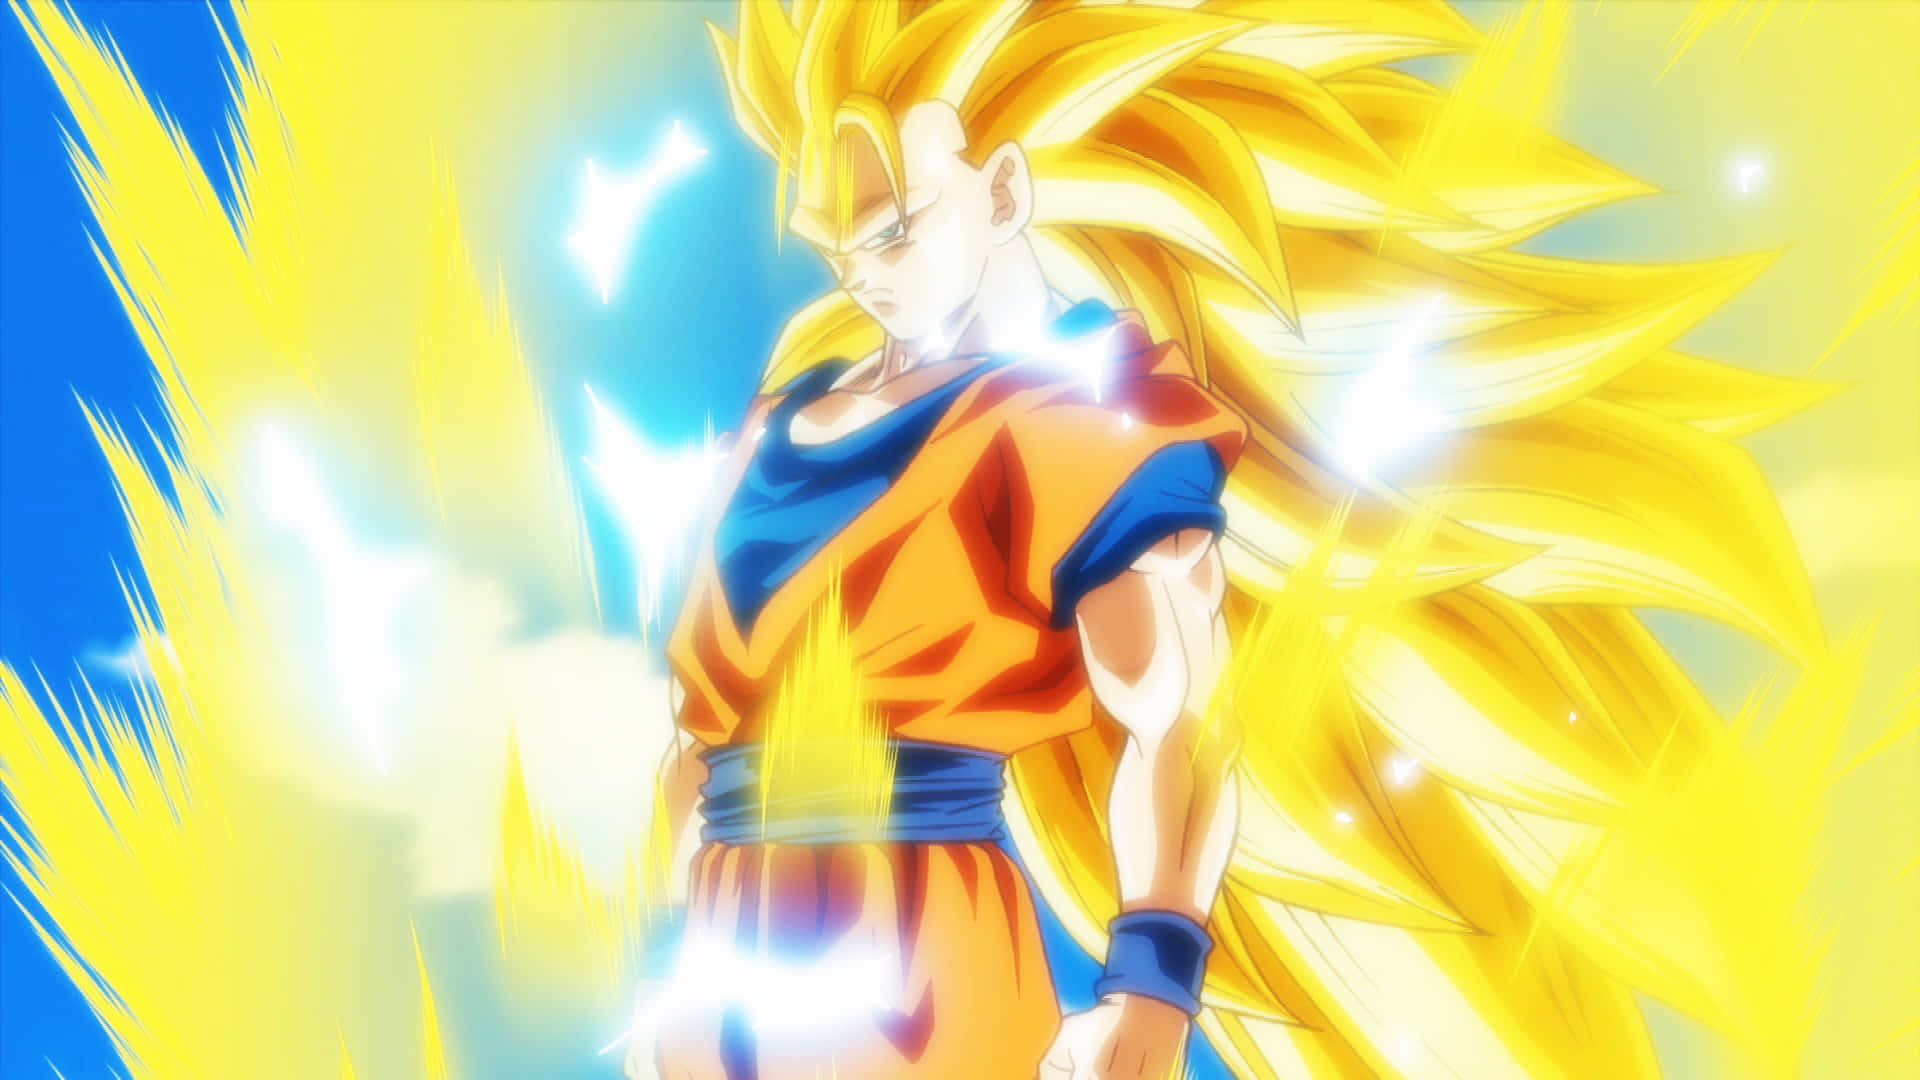 Trunks of Dragon Ball Z stands ready to face off against a powerful opponent. Wallpaper